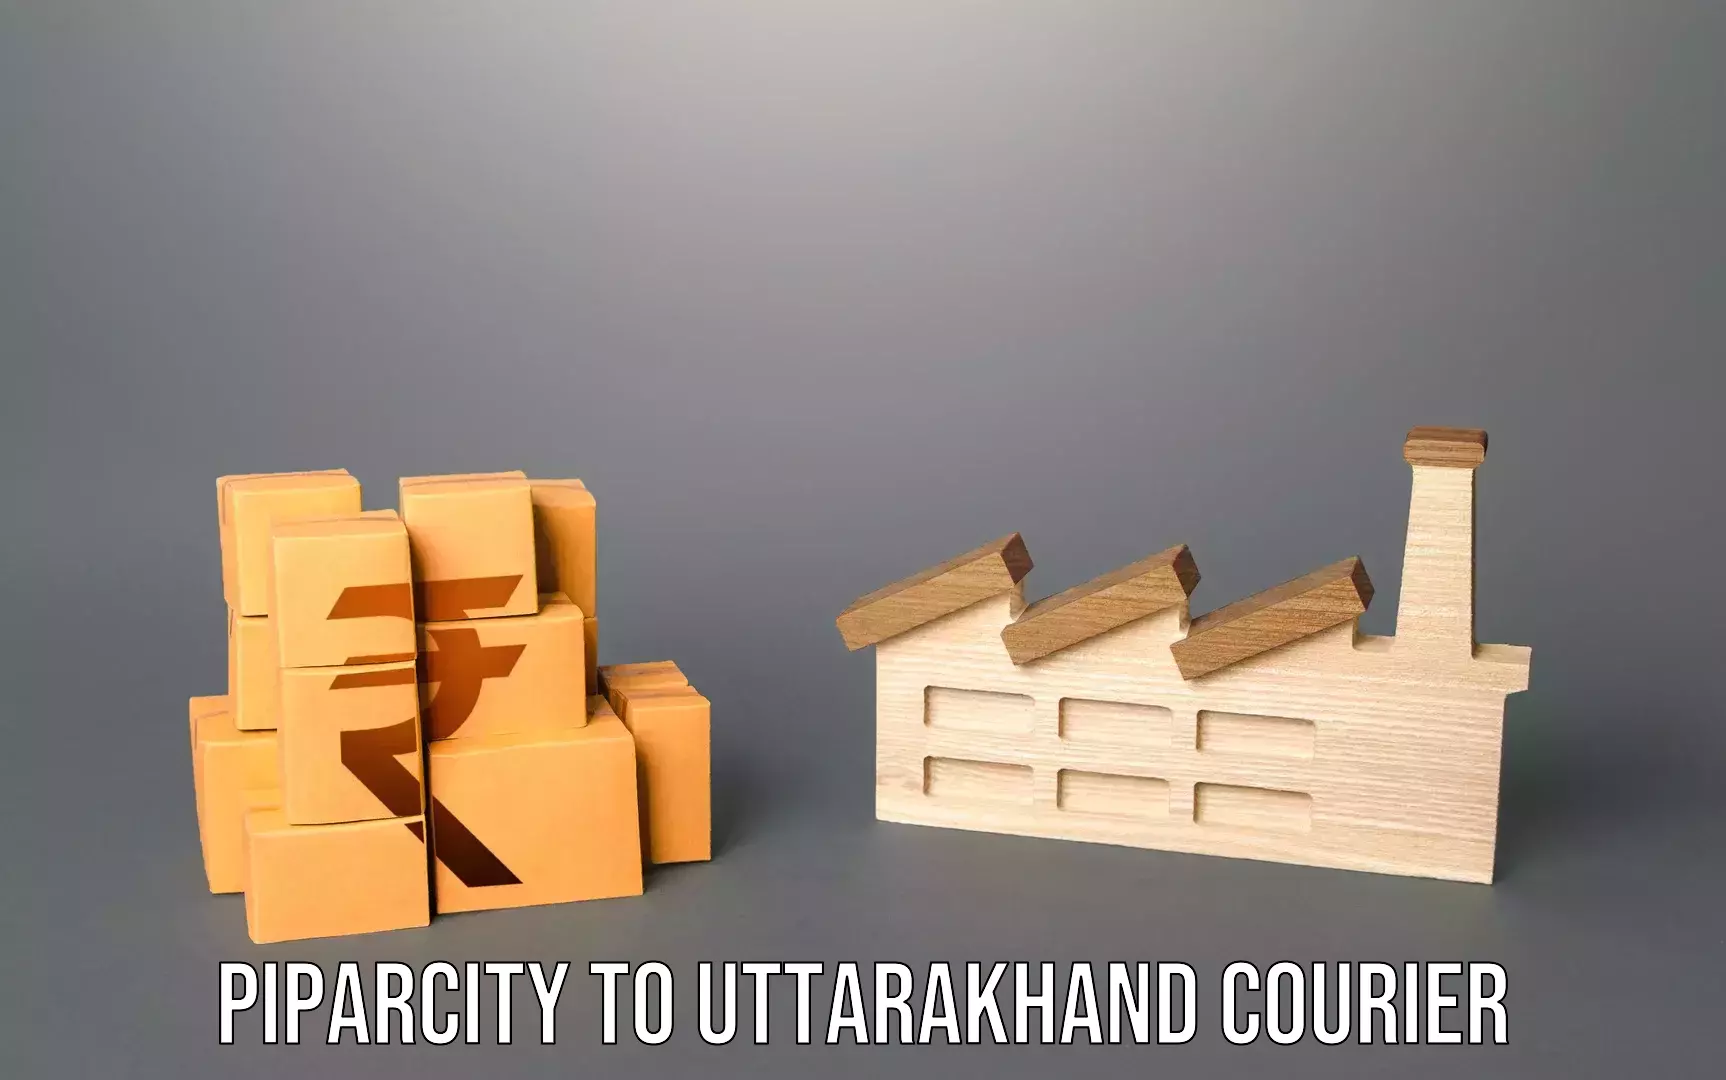 Online luggage shipping booking Piparcity to Uttarakhand